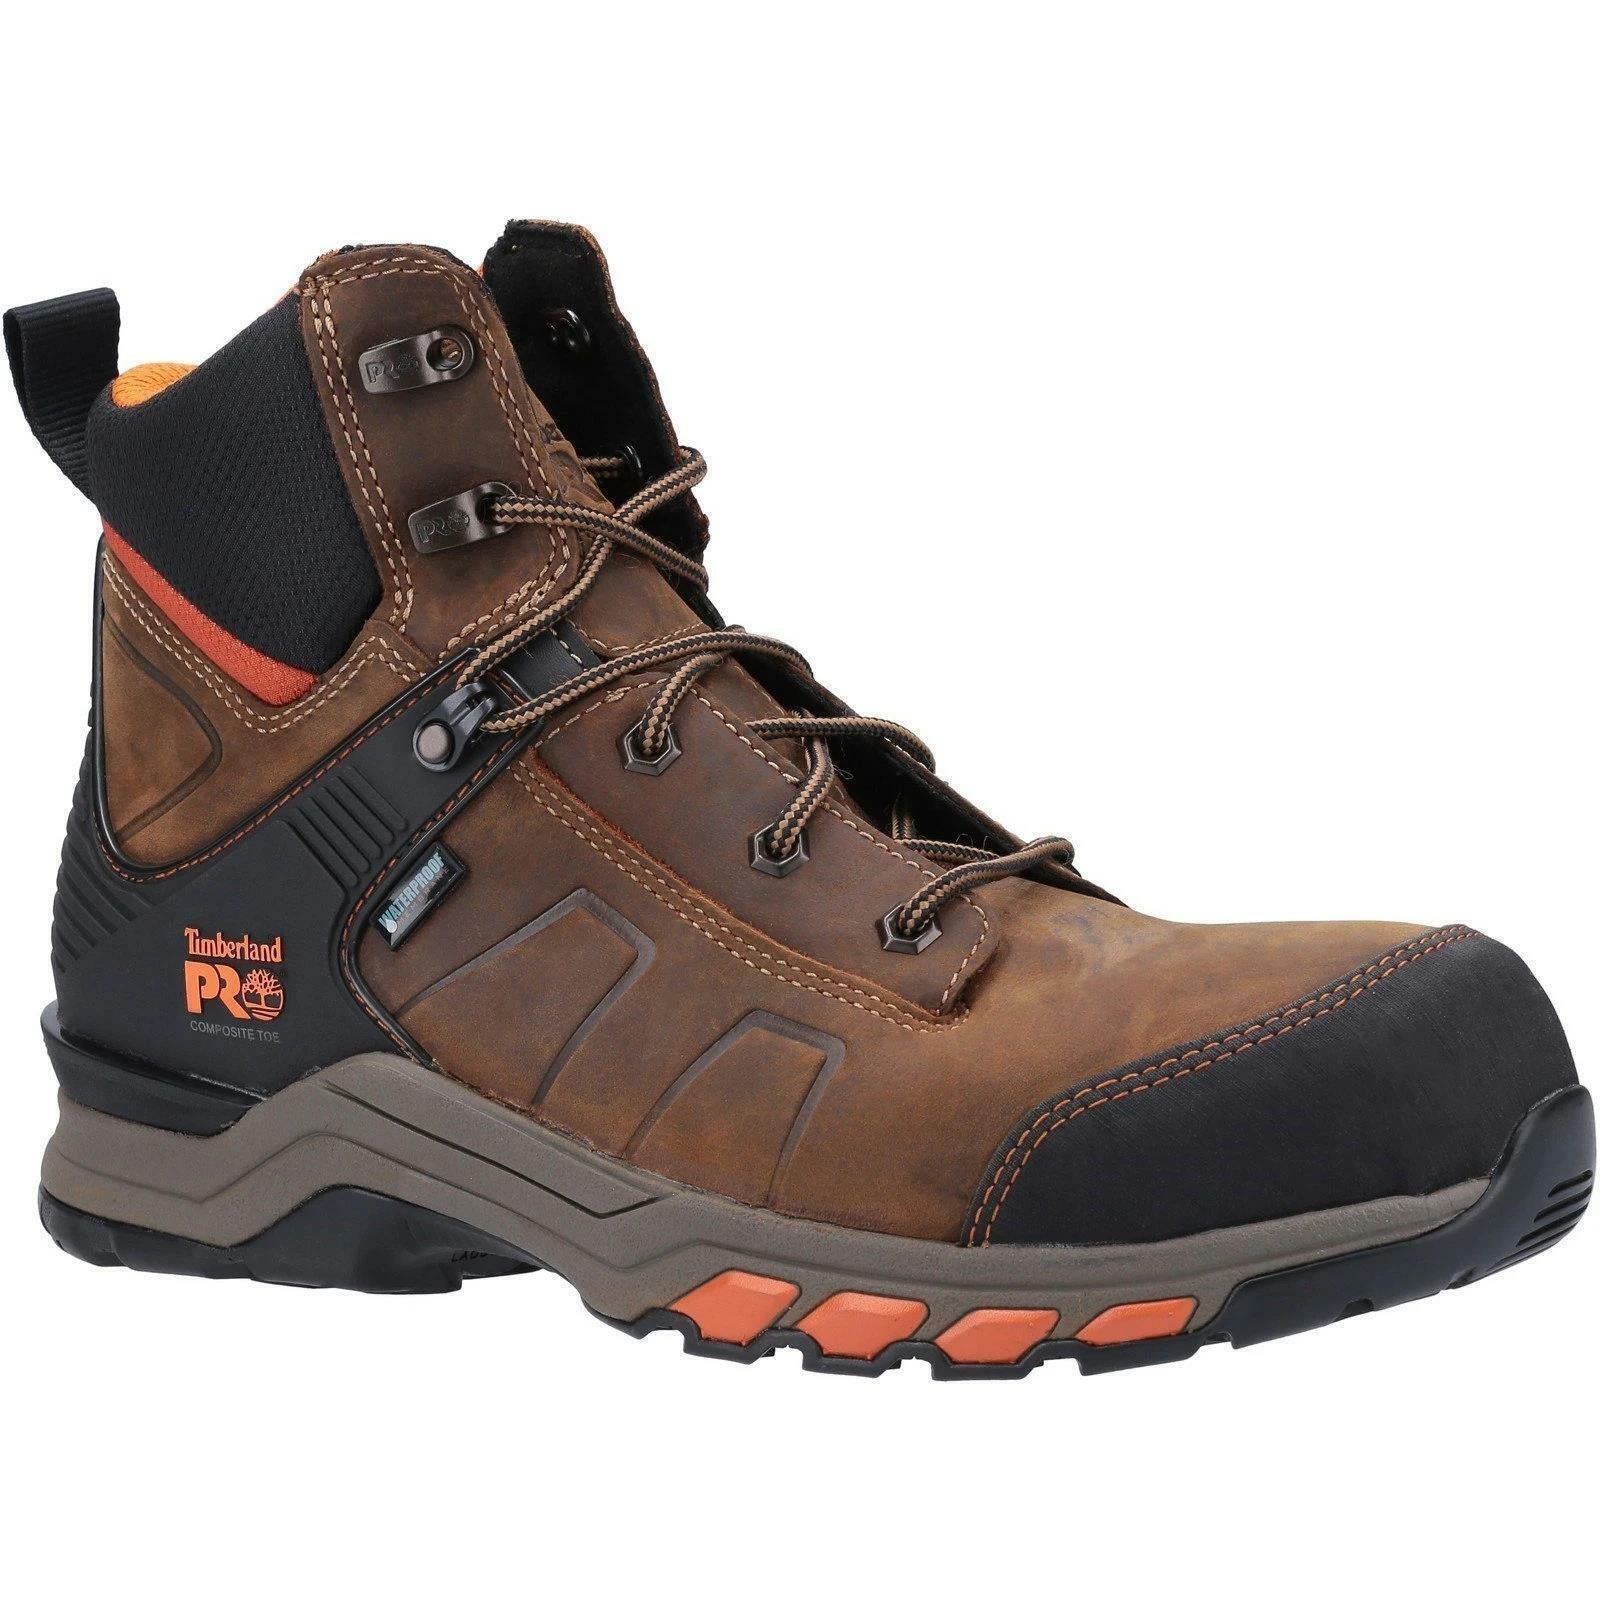 Timberland Hypercharge S3 brown/orange leather composite work safety boots